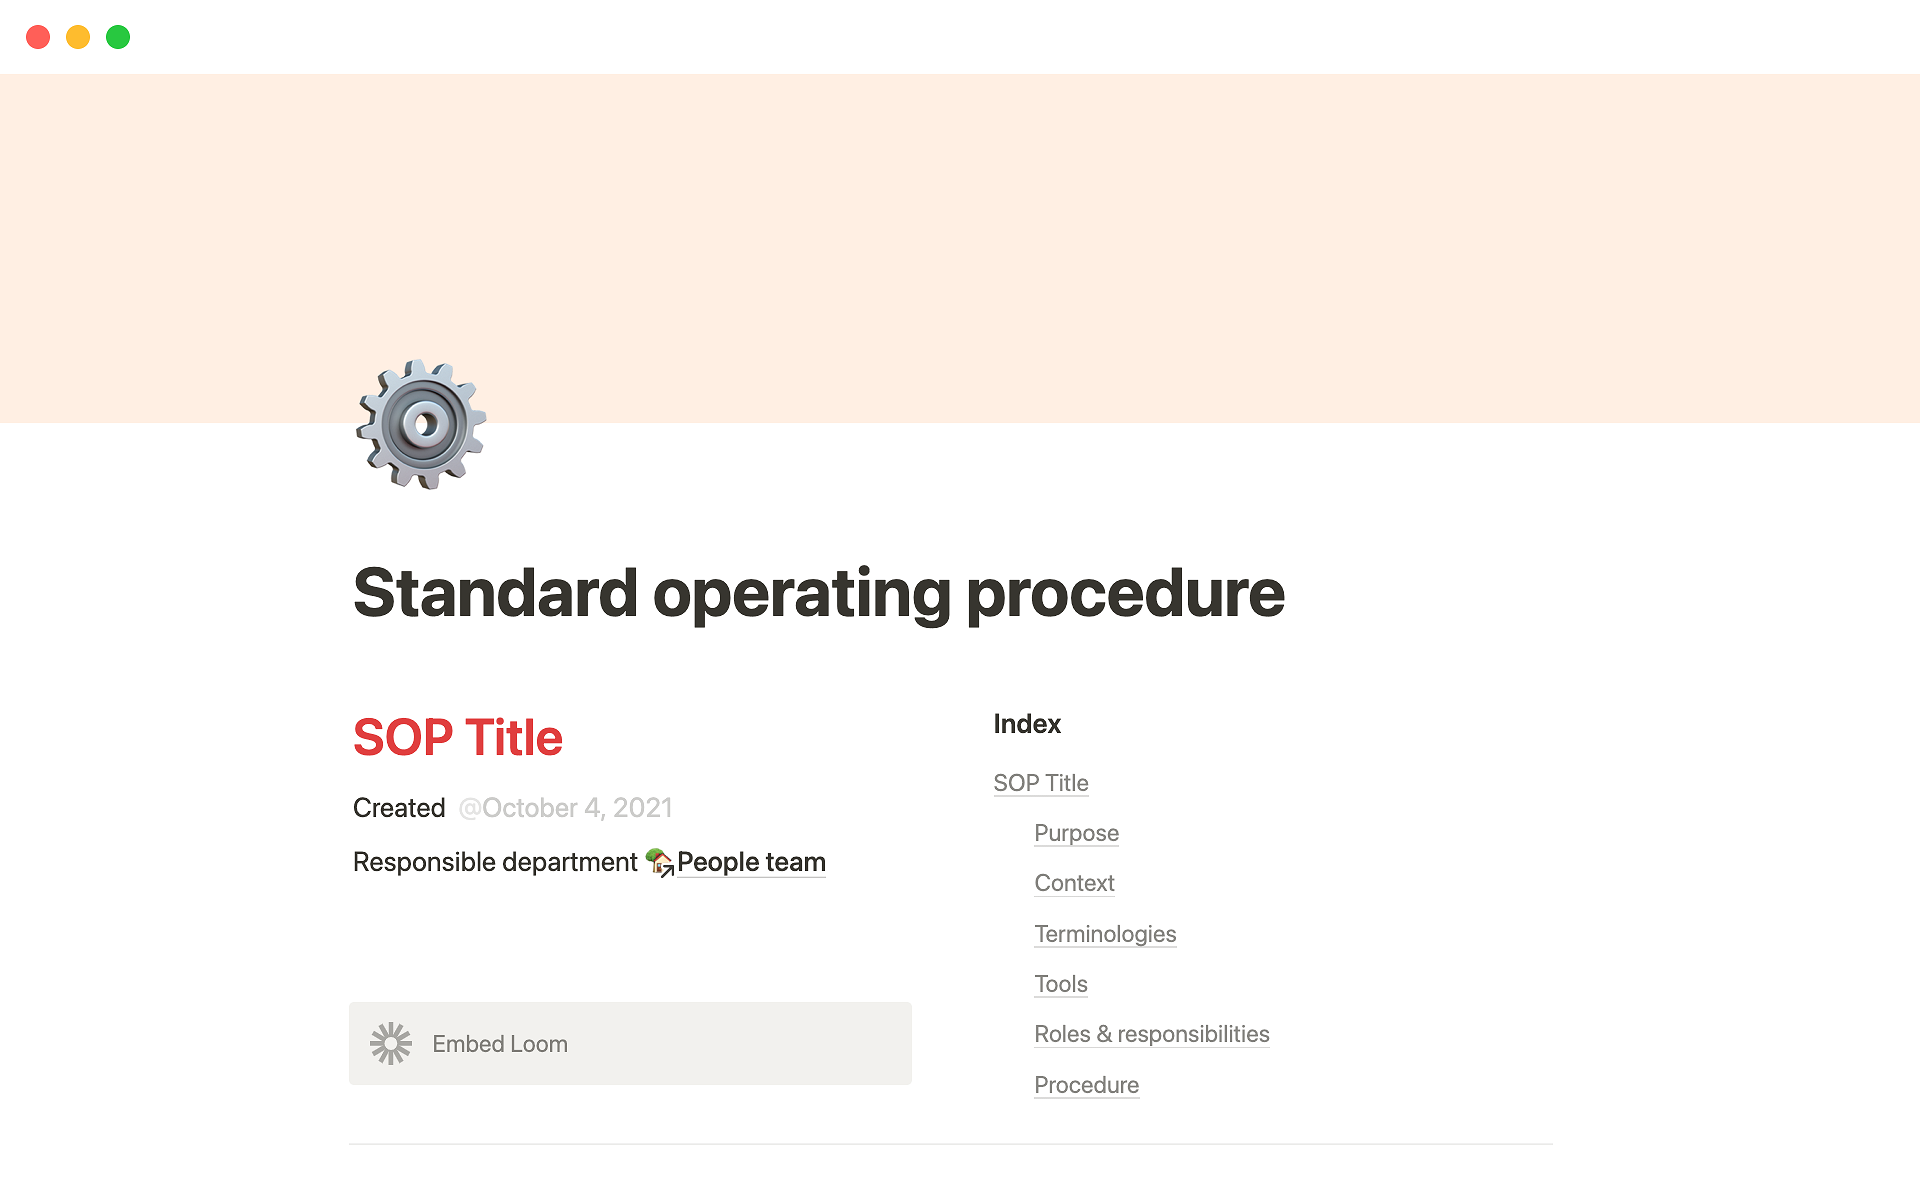 A standard operating procedure (SOP) outlines how things at your company are done.